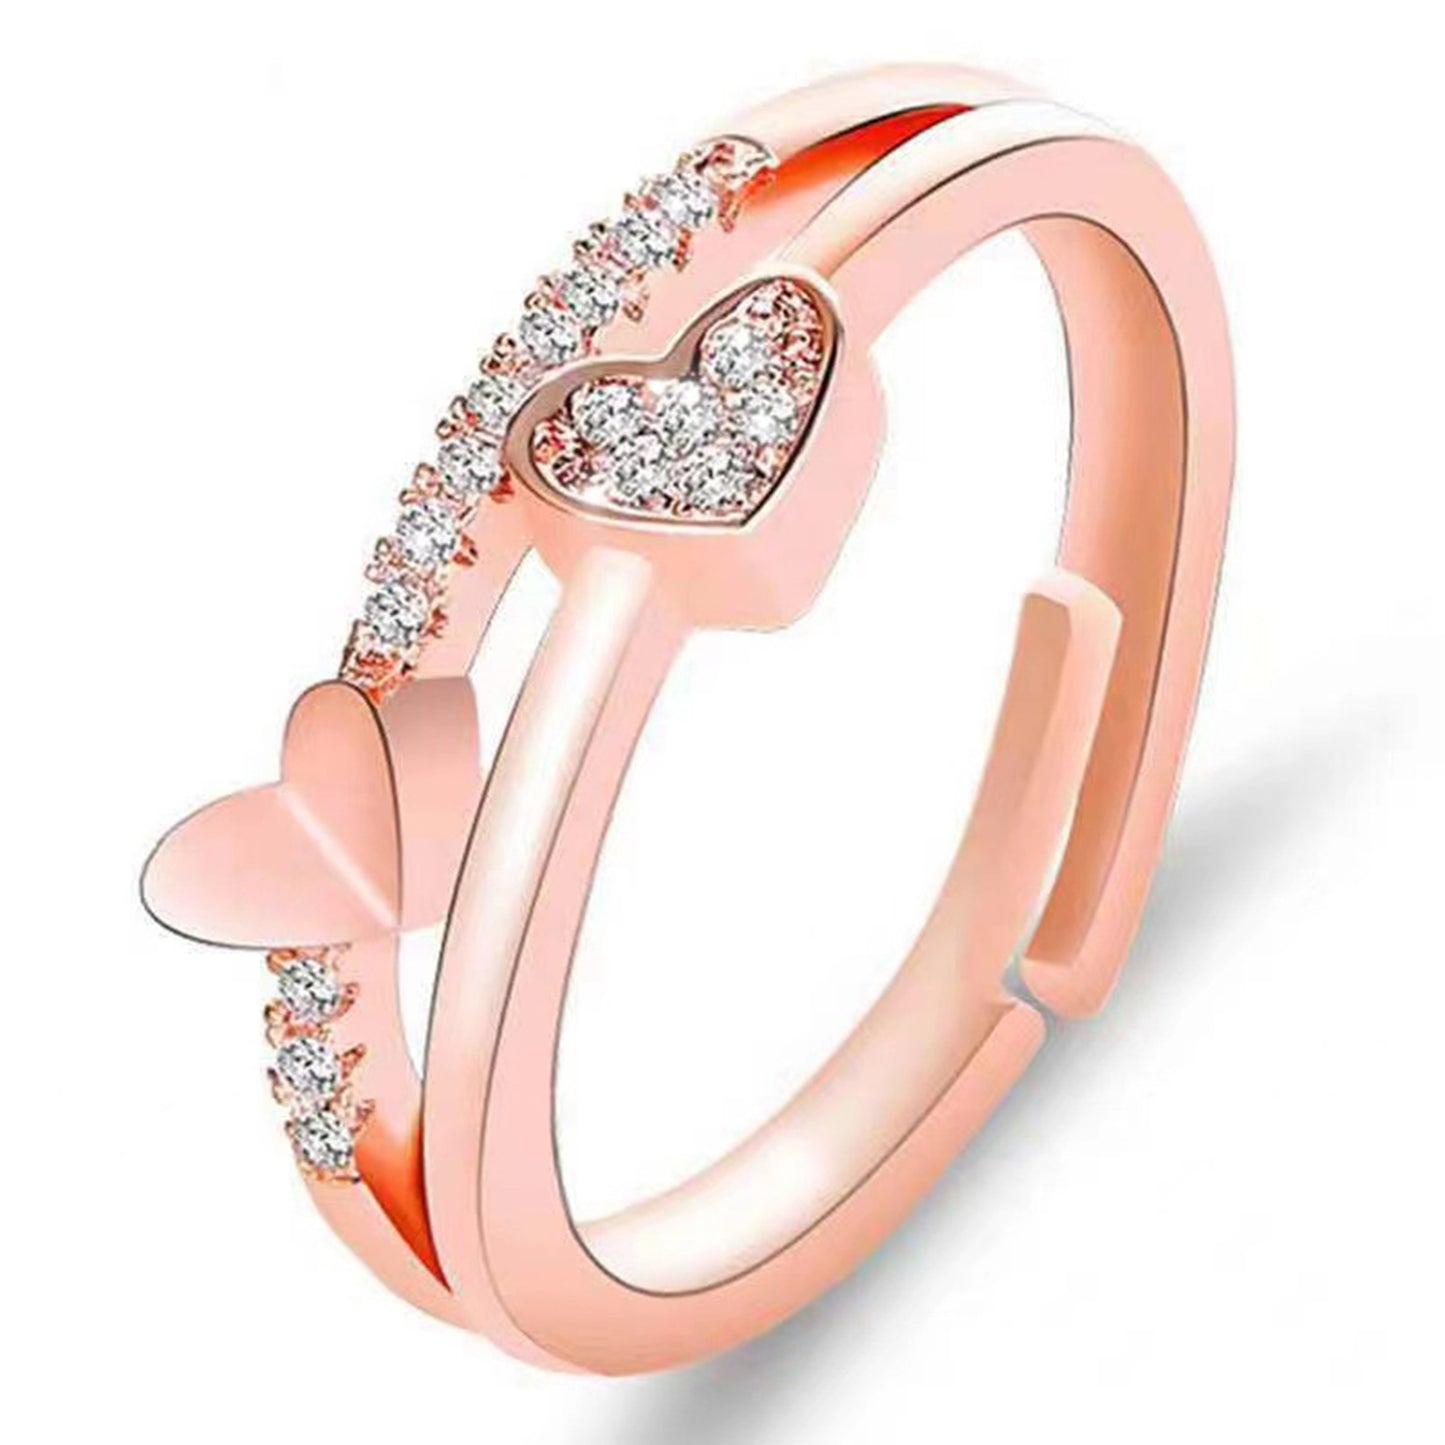 Alloy Crystal Gold Plated Multi-Layered Adjustable Ring